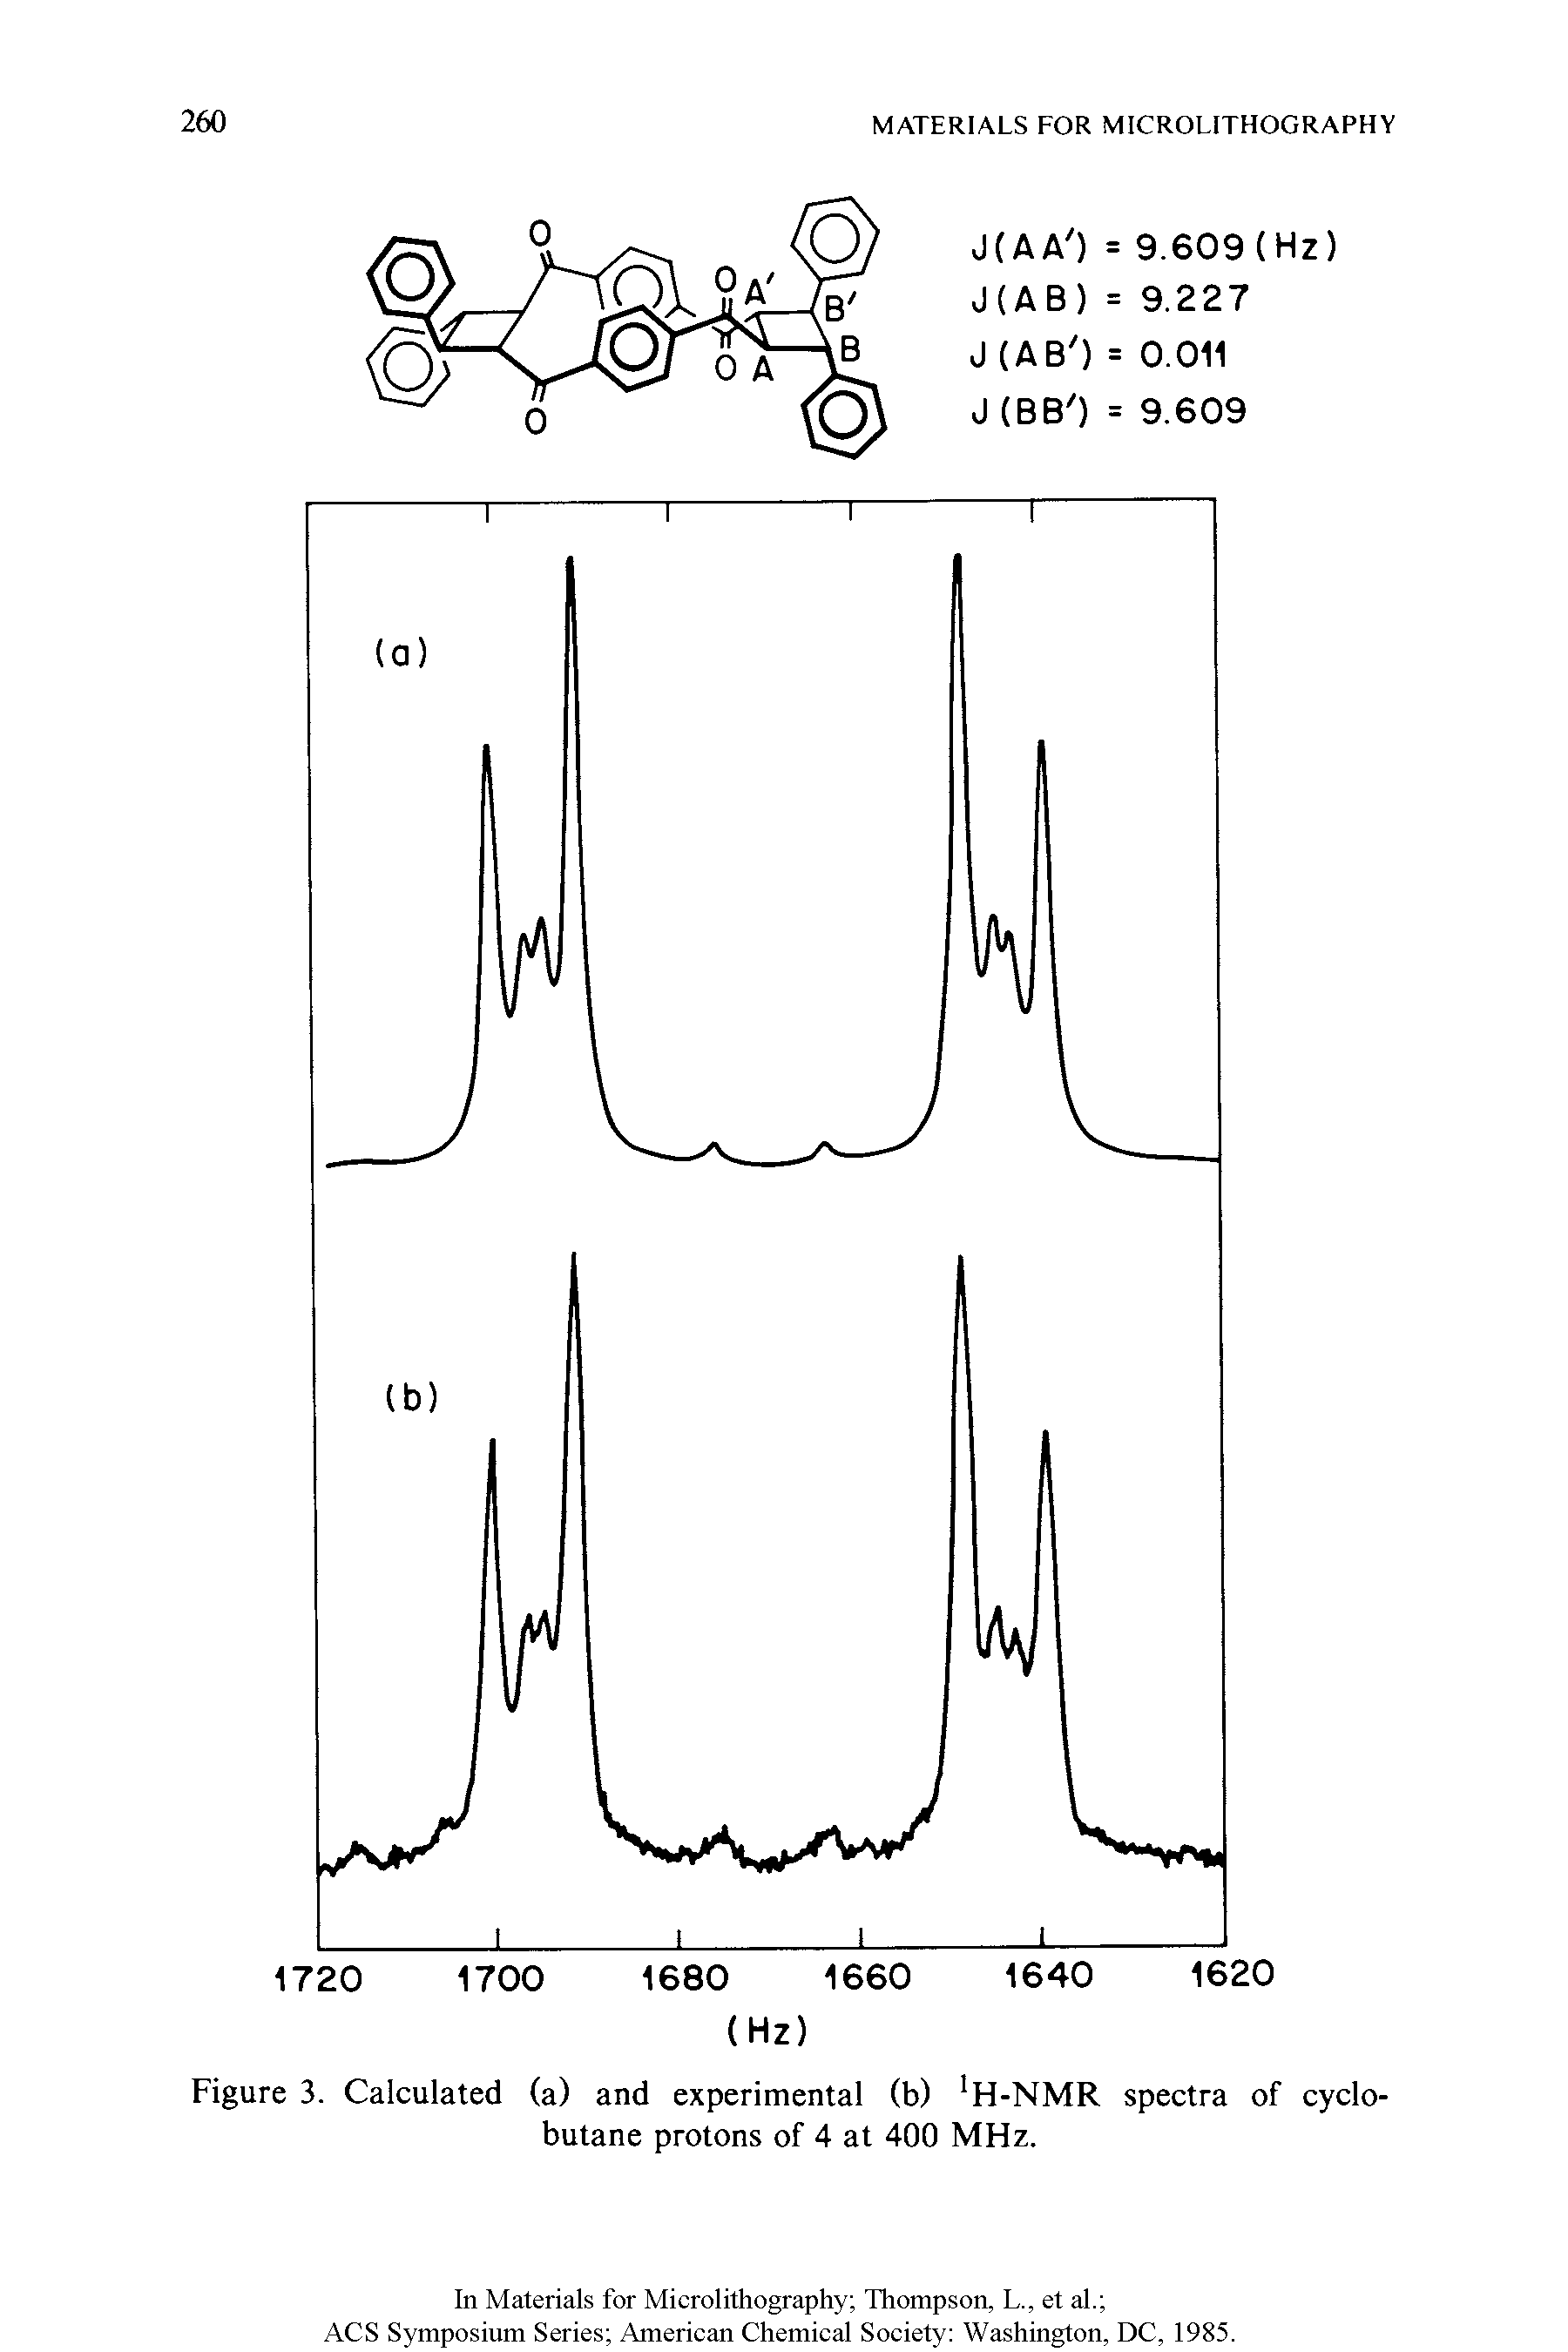 Figure 3. Calculated (a) and experimental (b) H-NMR spectra of cyclo butane protons of 4 at 400 MHz.